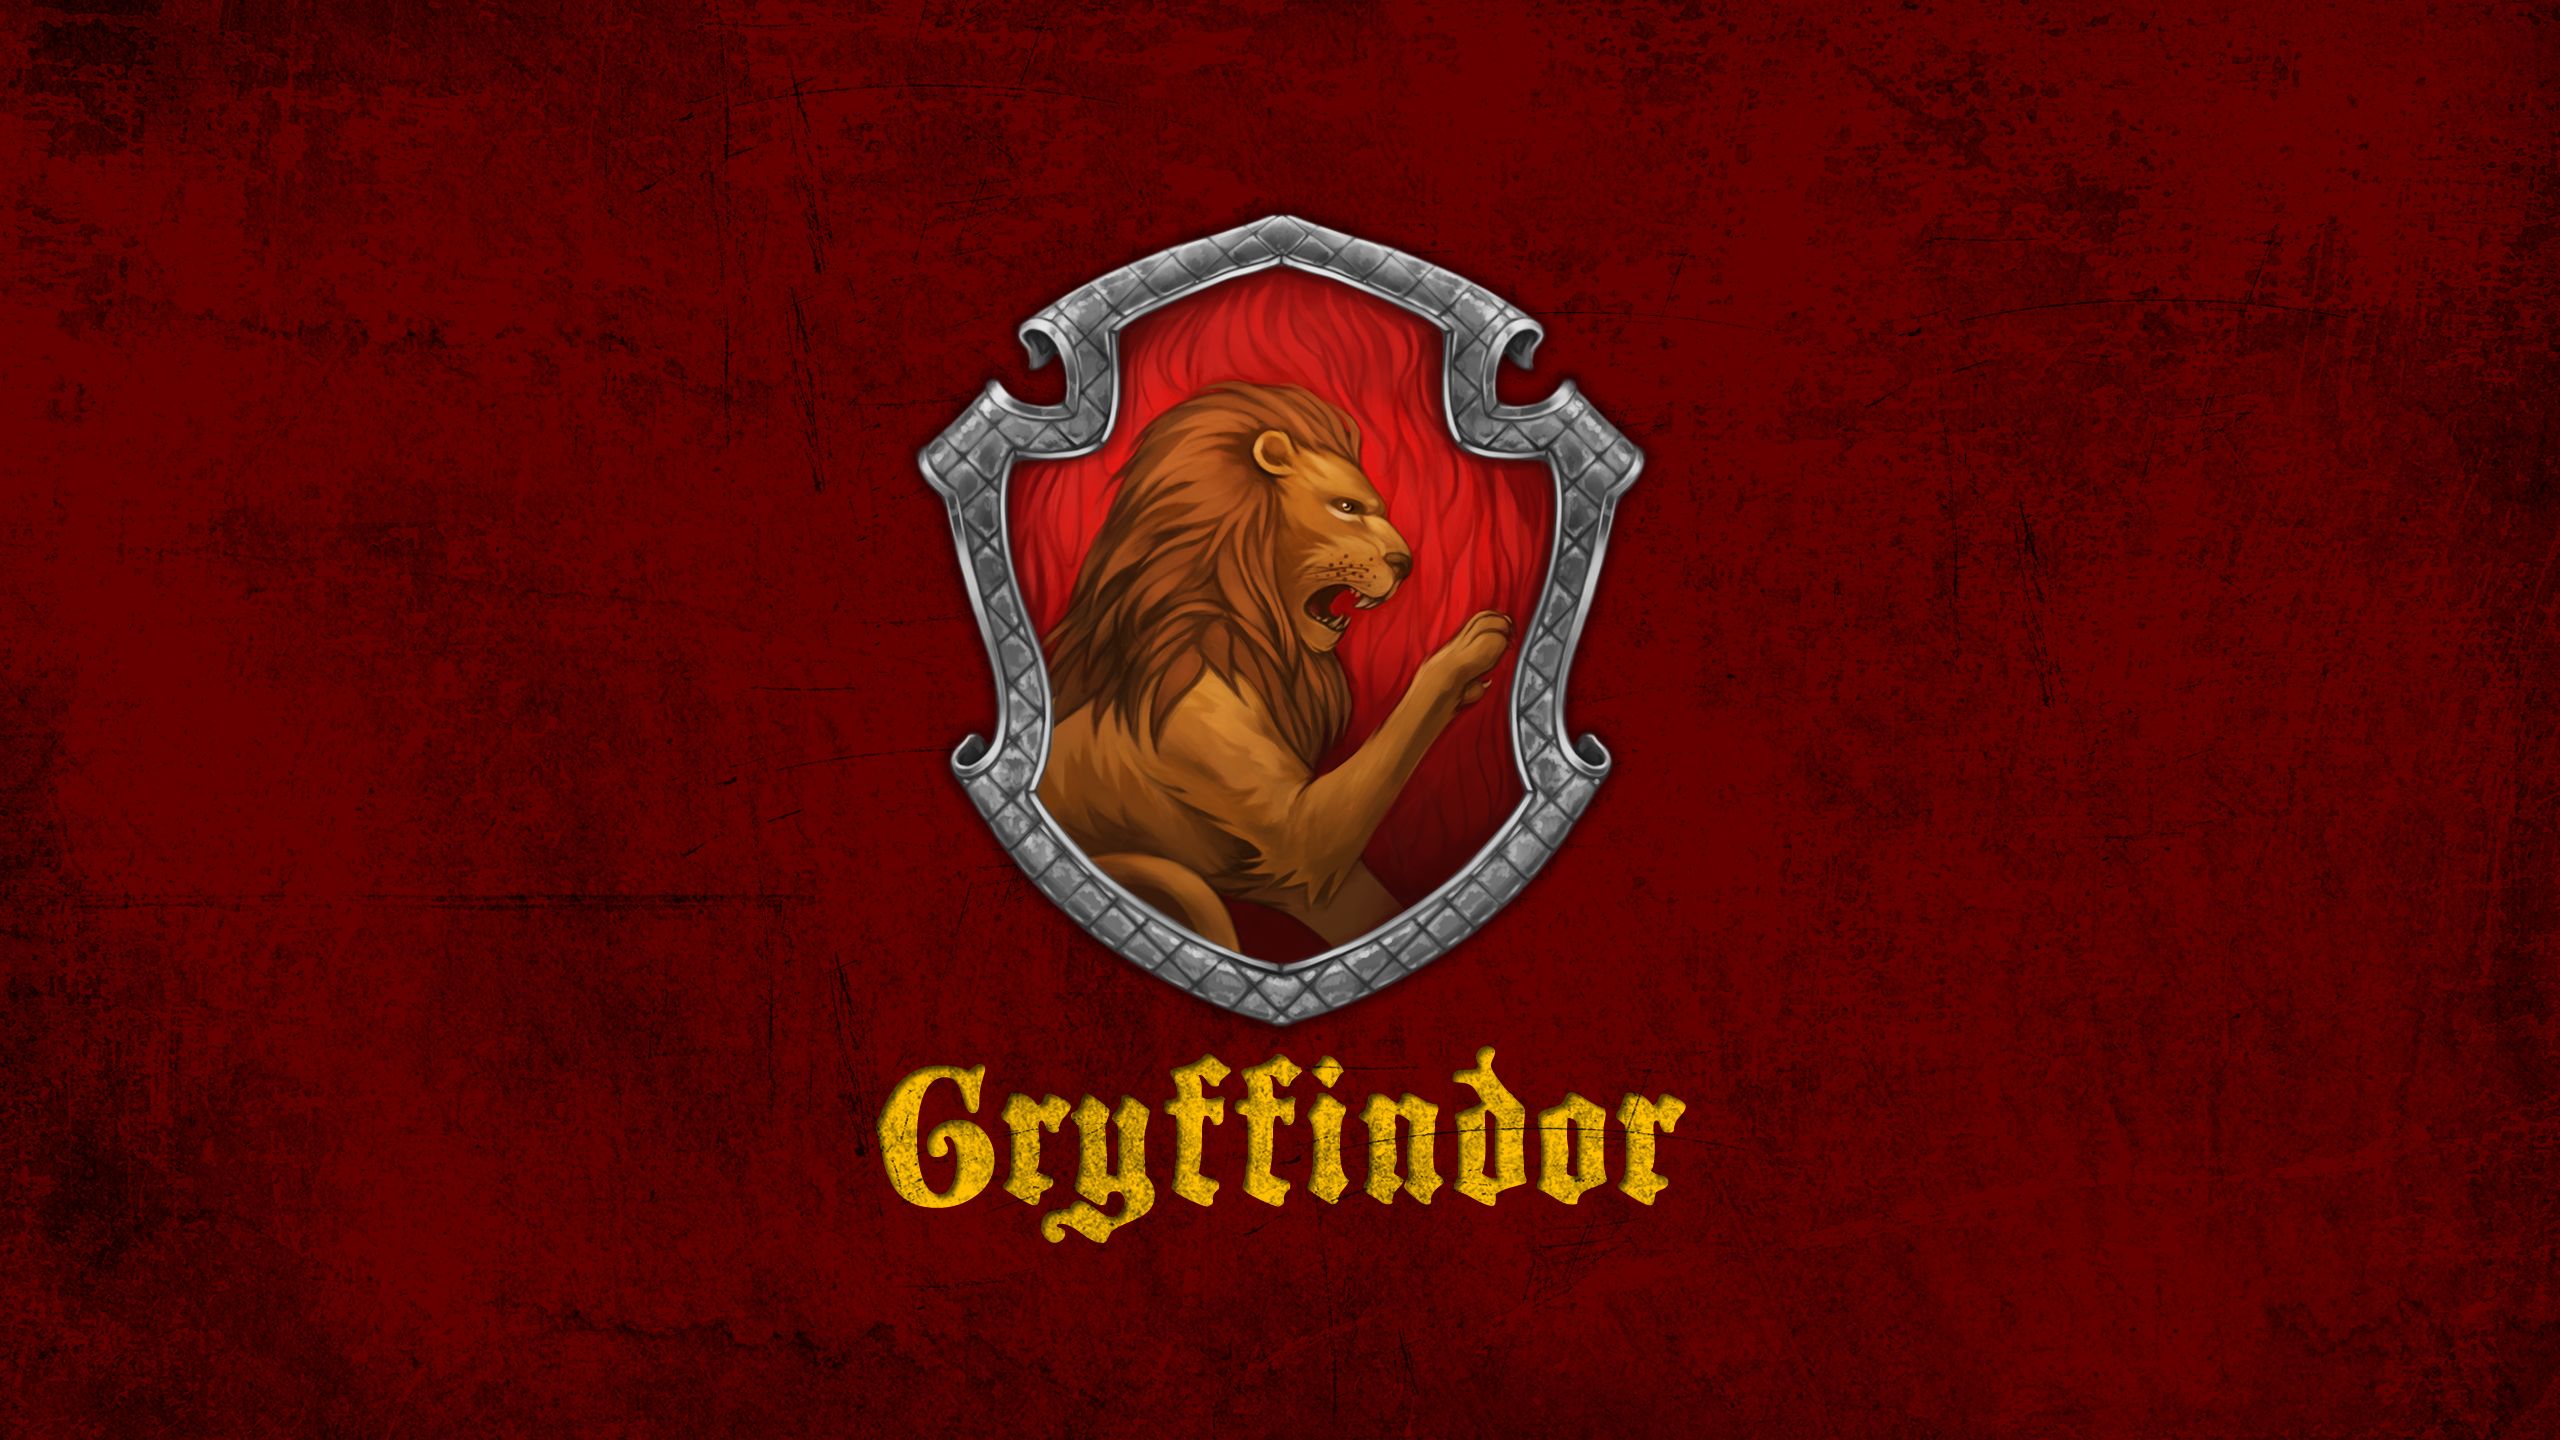 Gryffindor hd papers and backgrounds